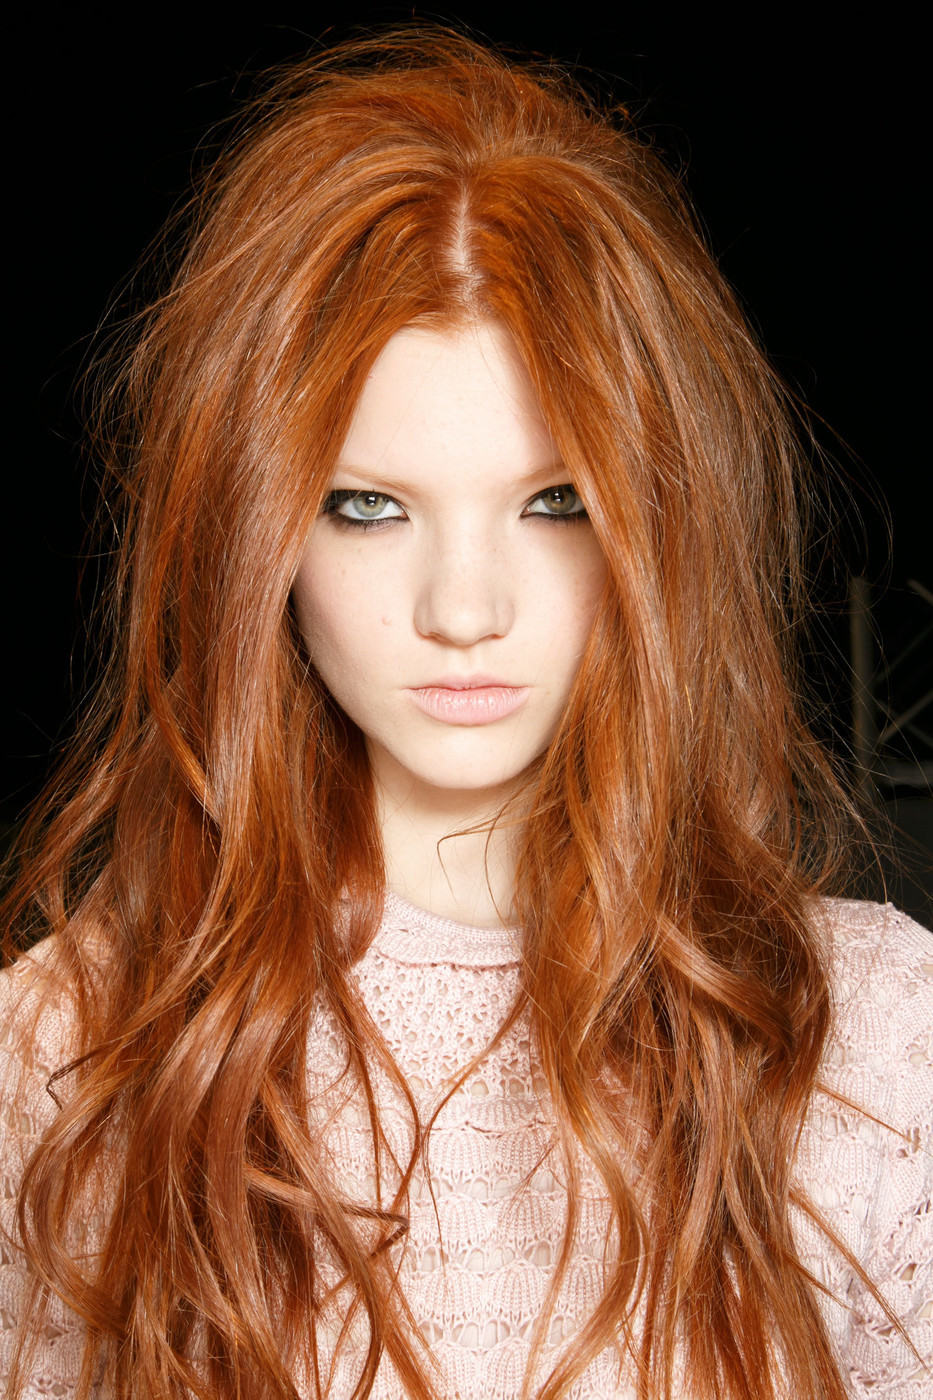 Model With Red Hair